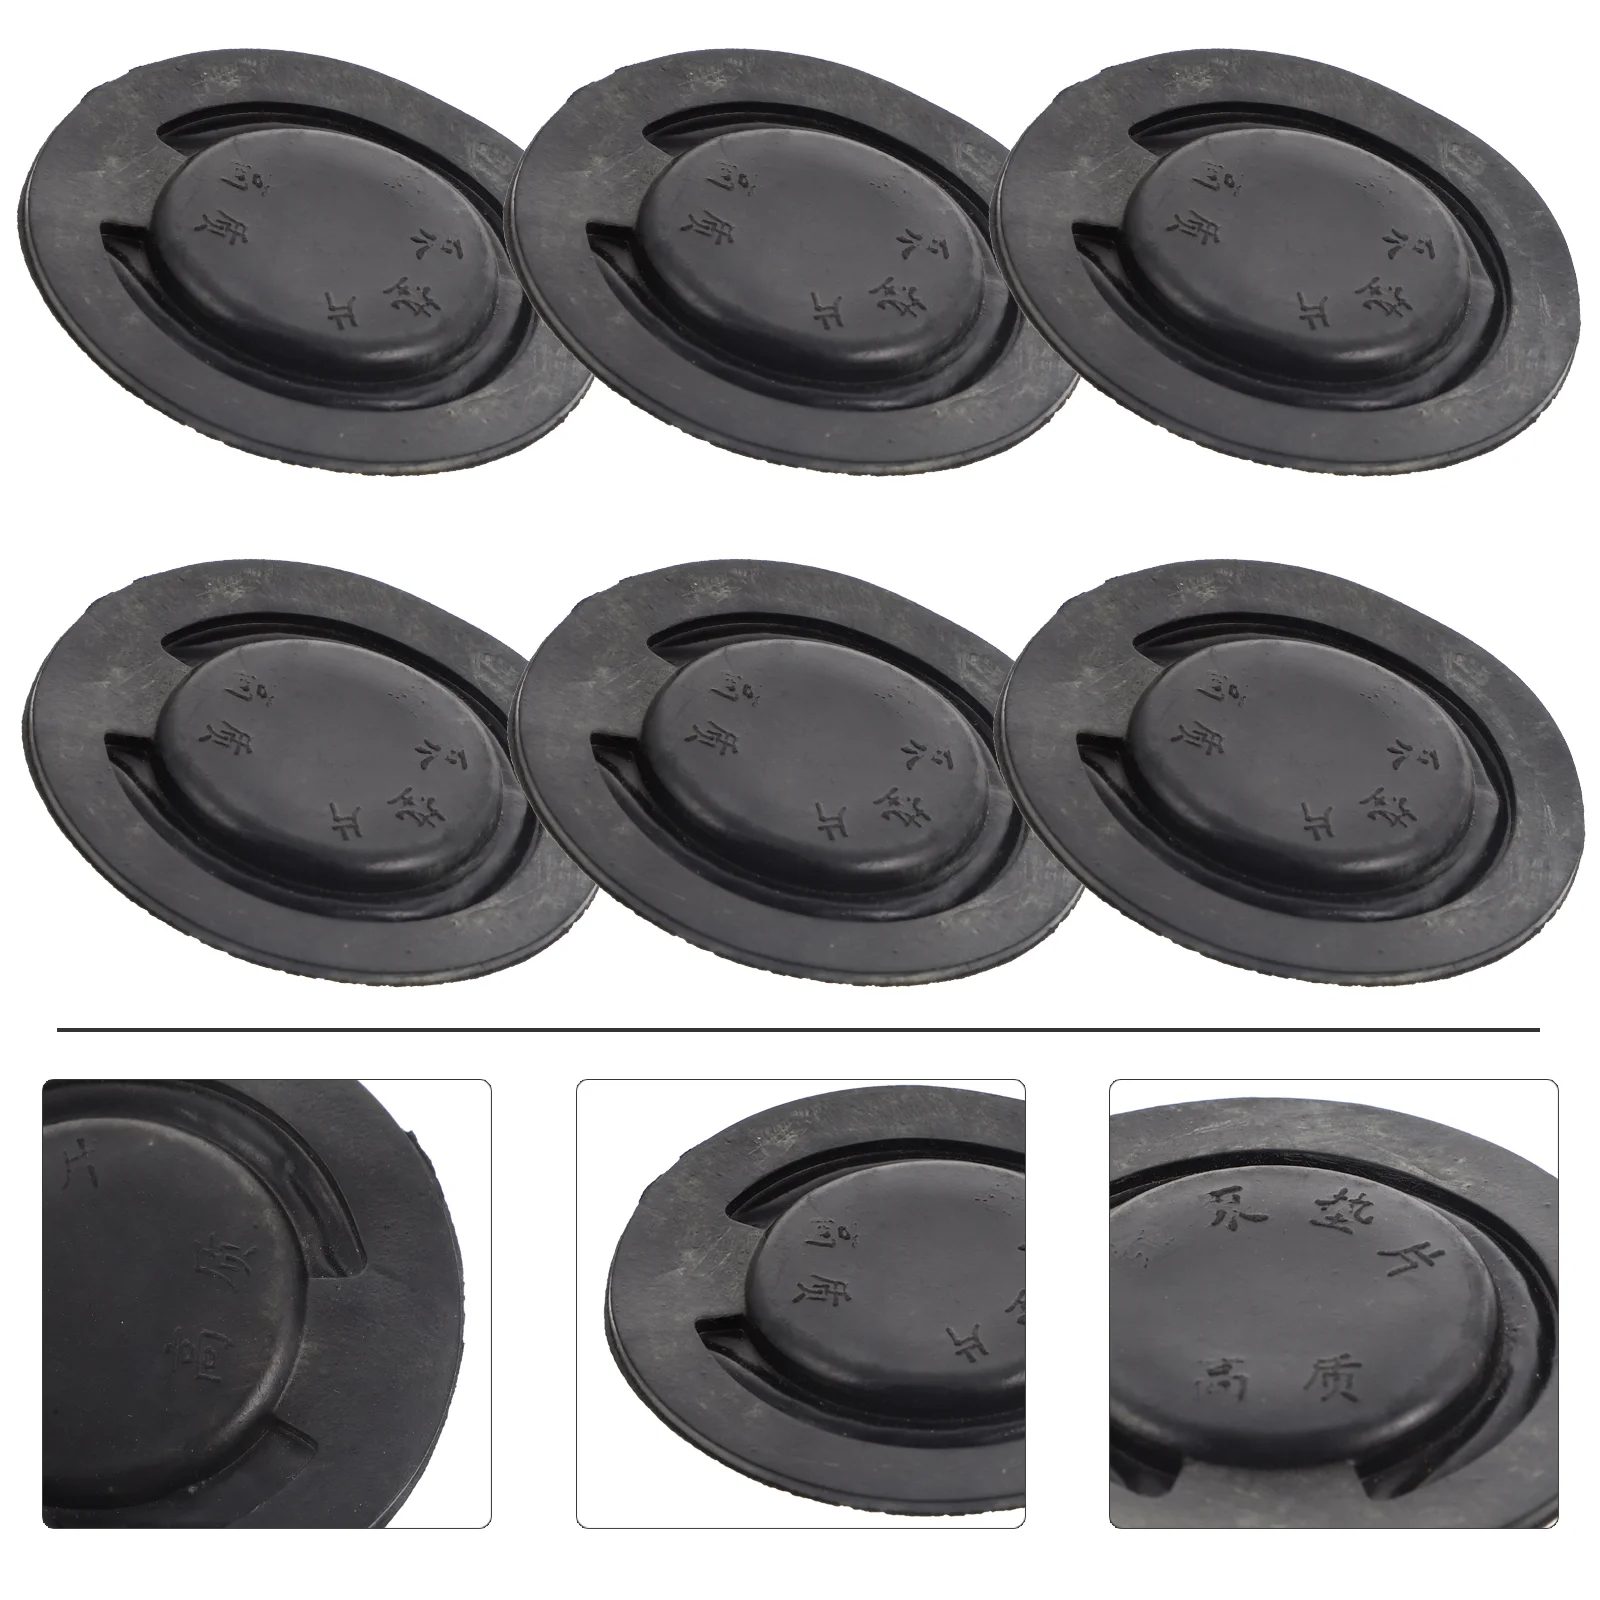 

6 Pcs Hand Pump Water Bowl Valves Gaskets Cushions Rubber Sealing Washers Lower House Universal Piston Professional